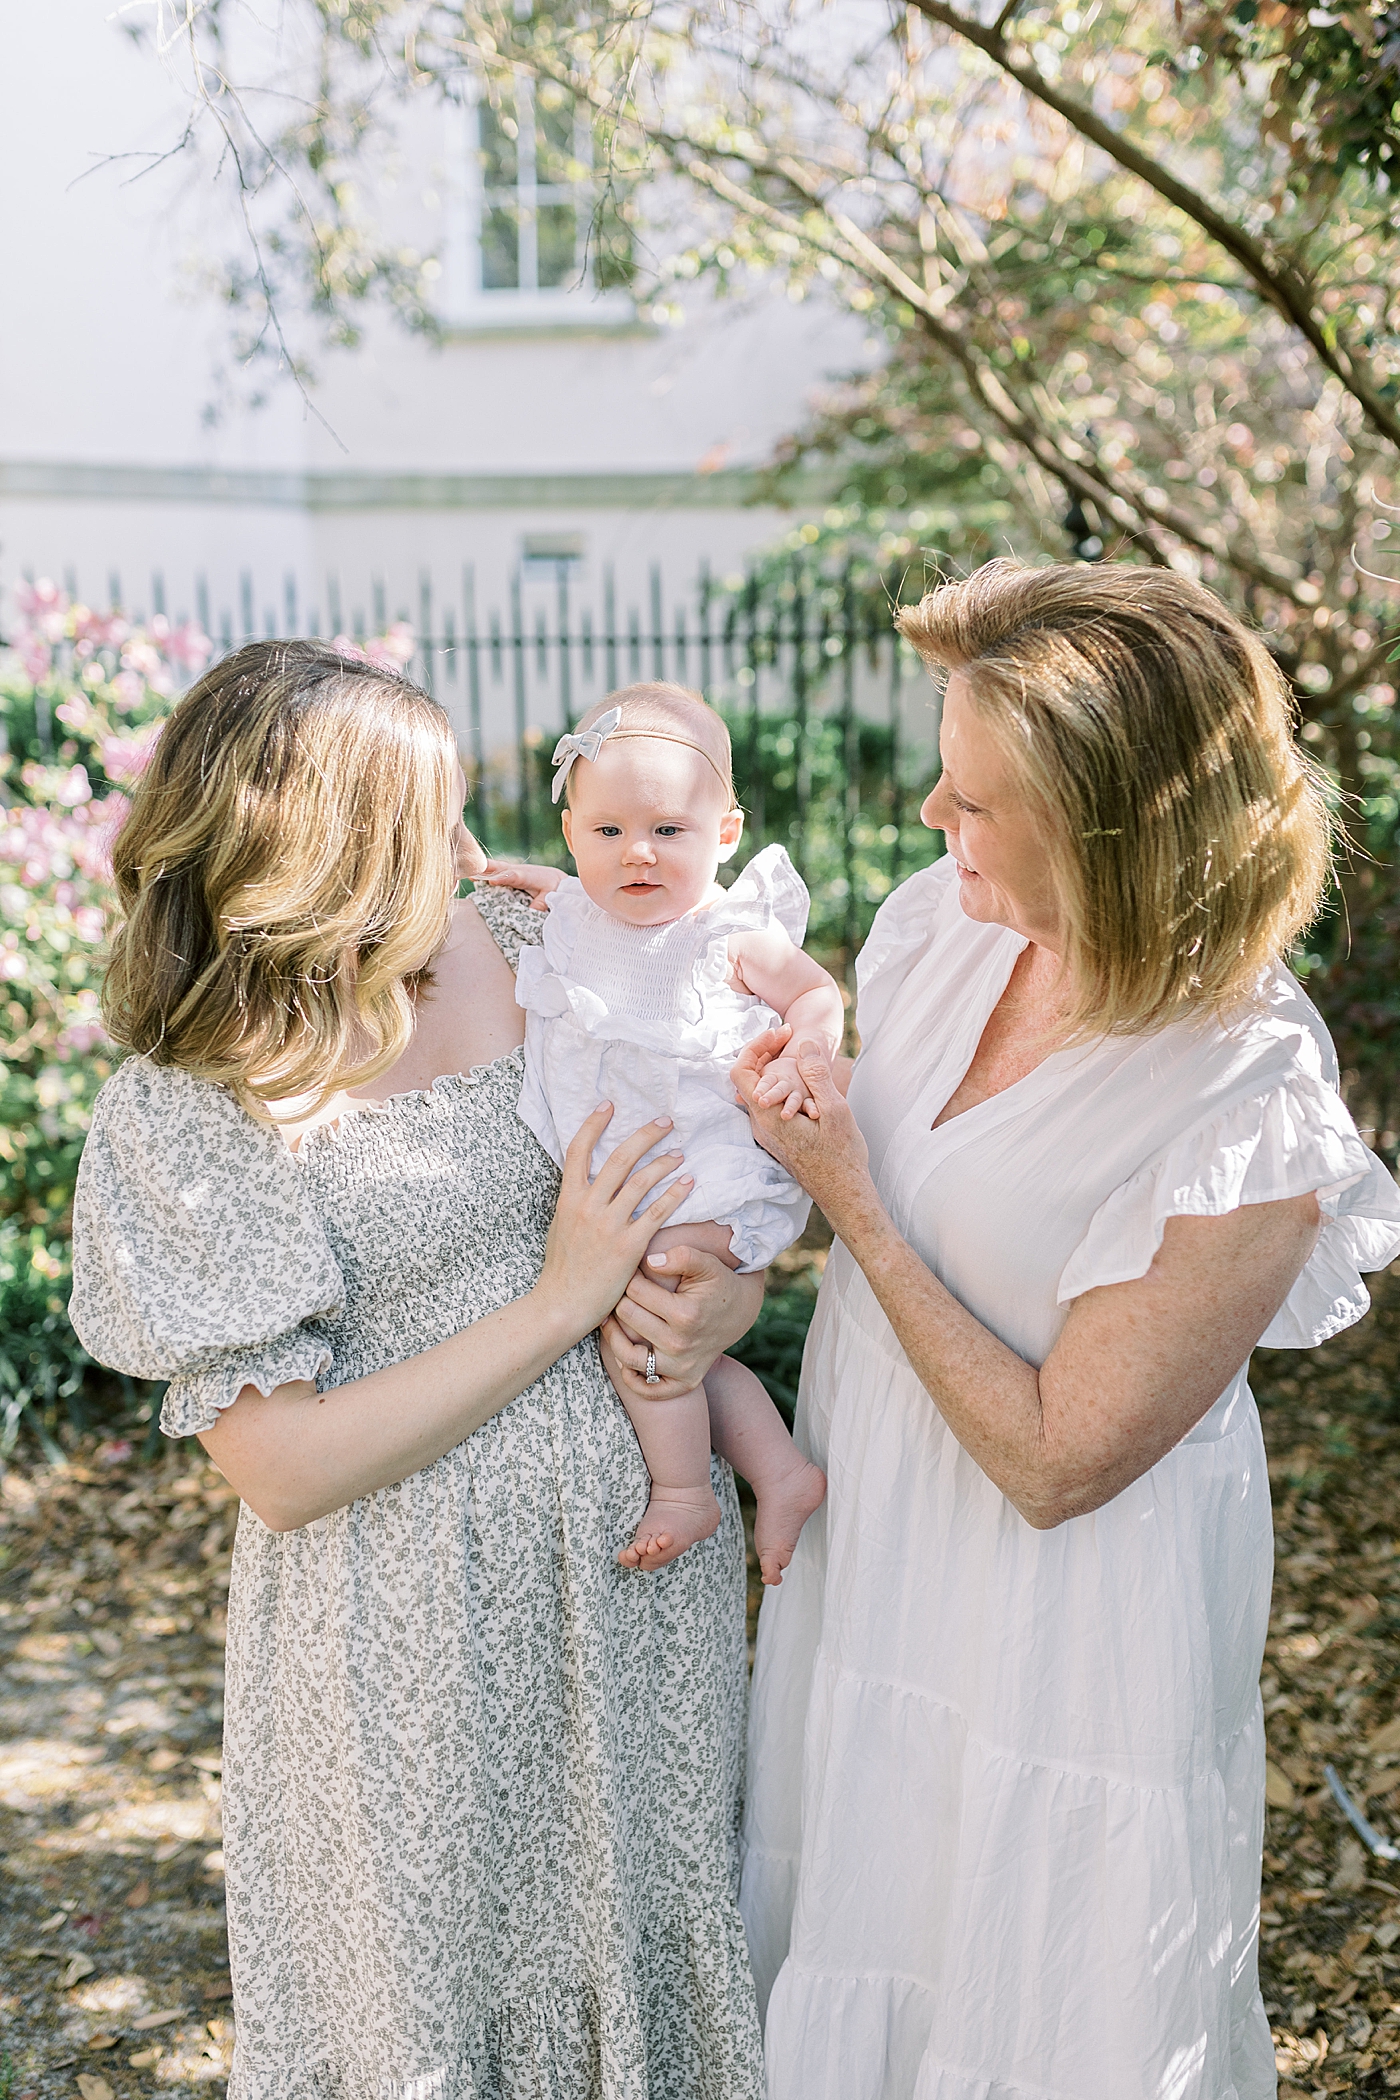 Mother and grandmother in spring dresses holding and admiring baby | Image by Caitlyn Motycka